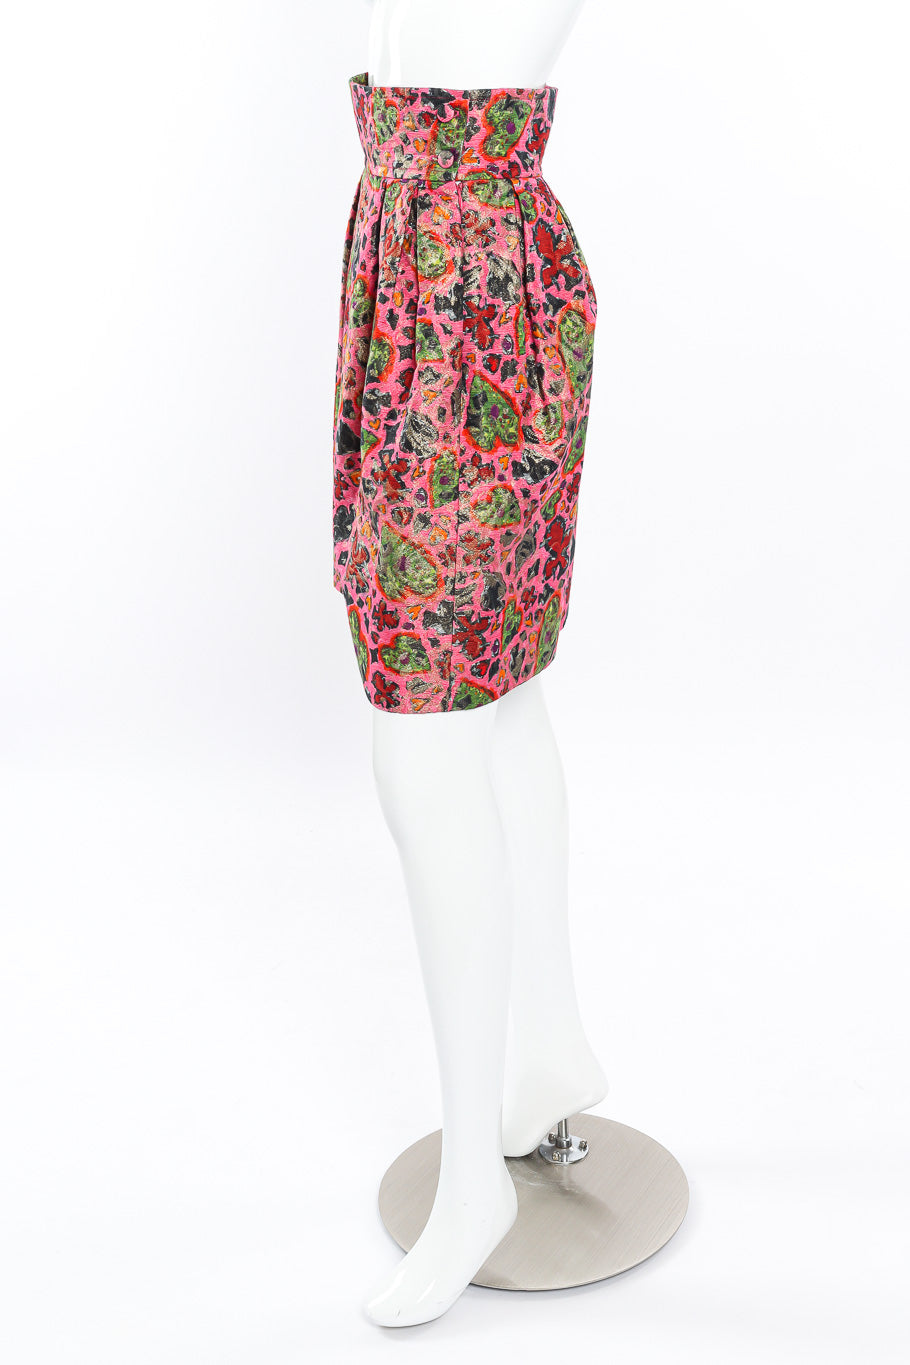 Vintage Christian Lacroix Abstract Print Skirt side view on mannequin @Recessla